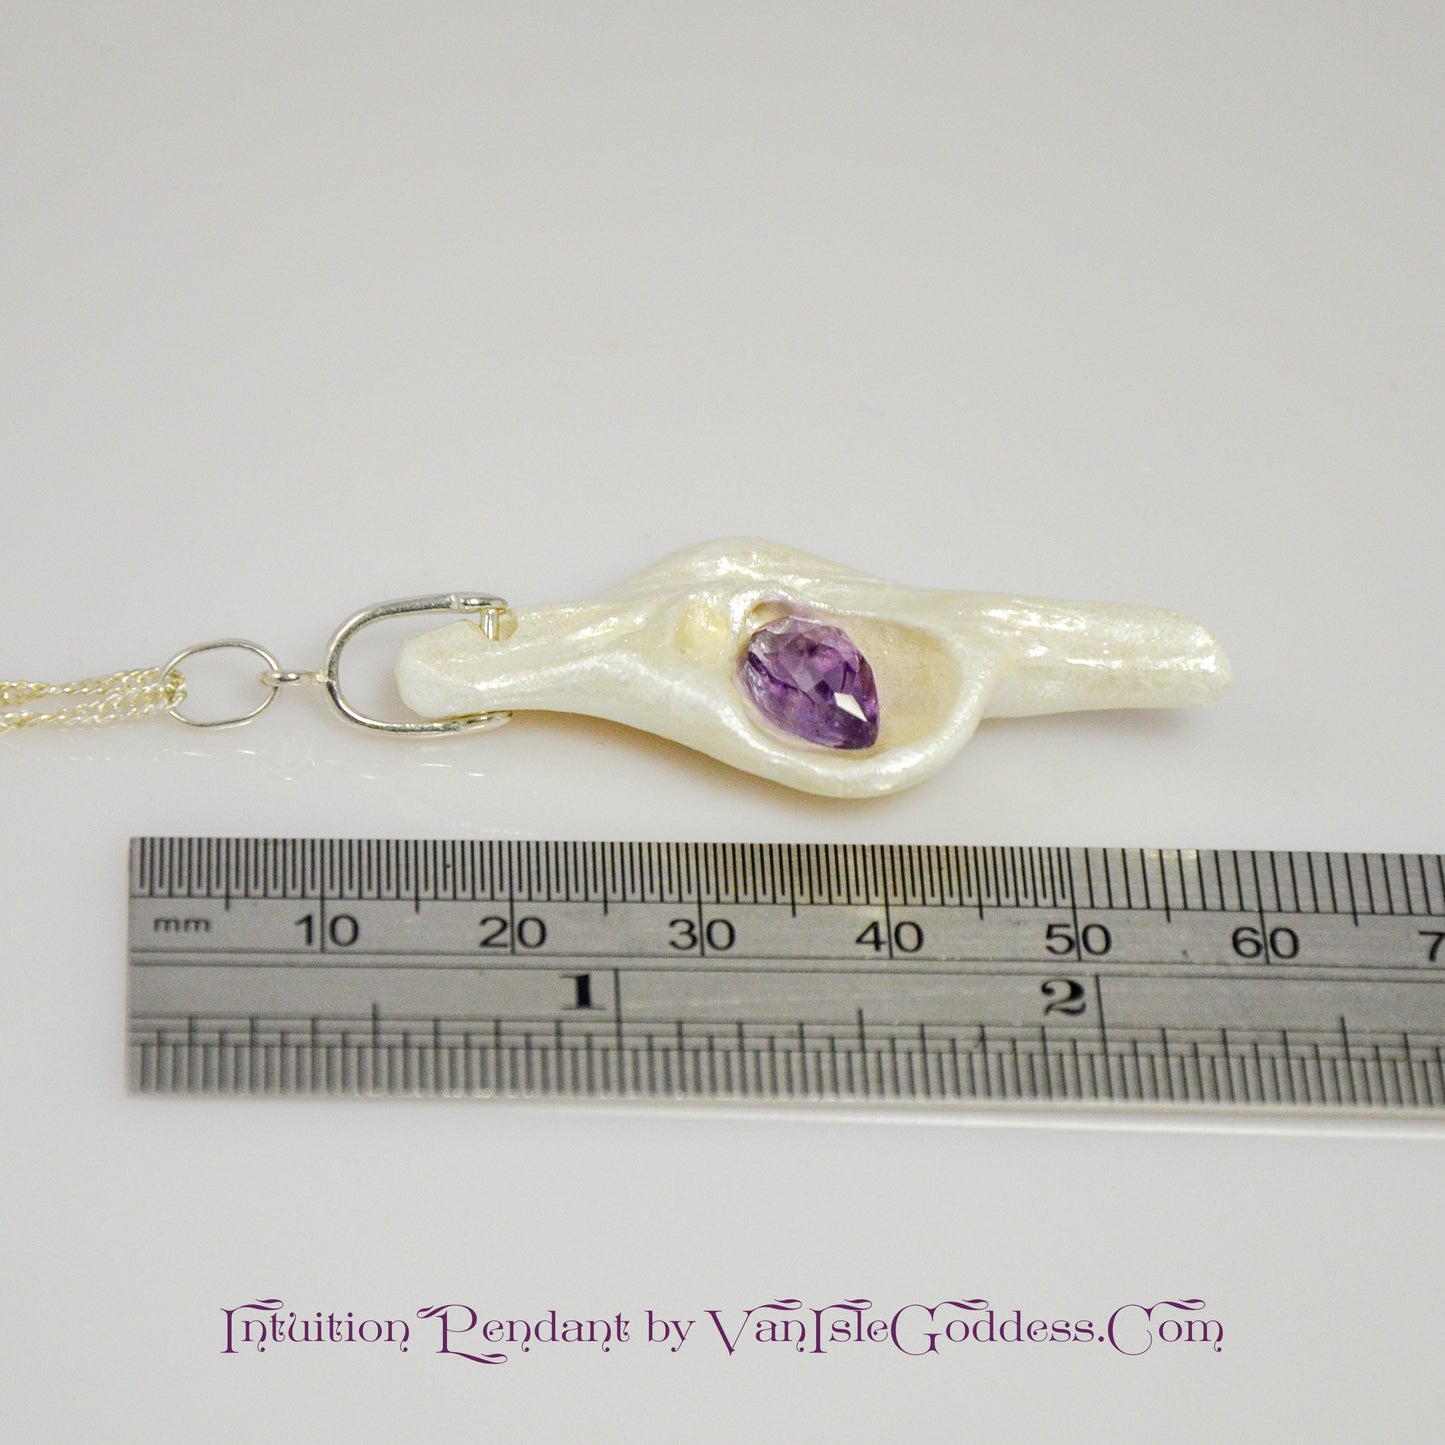 Intuition a natural seashell pendant with a beautiful rose cut marquise Amethyst.  The pendant is shown along side a ruler so the viewer can see the length of the pendant.